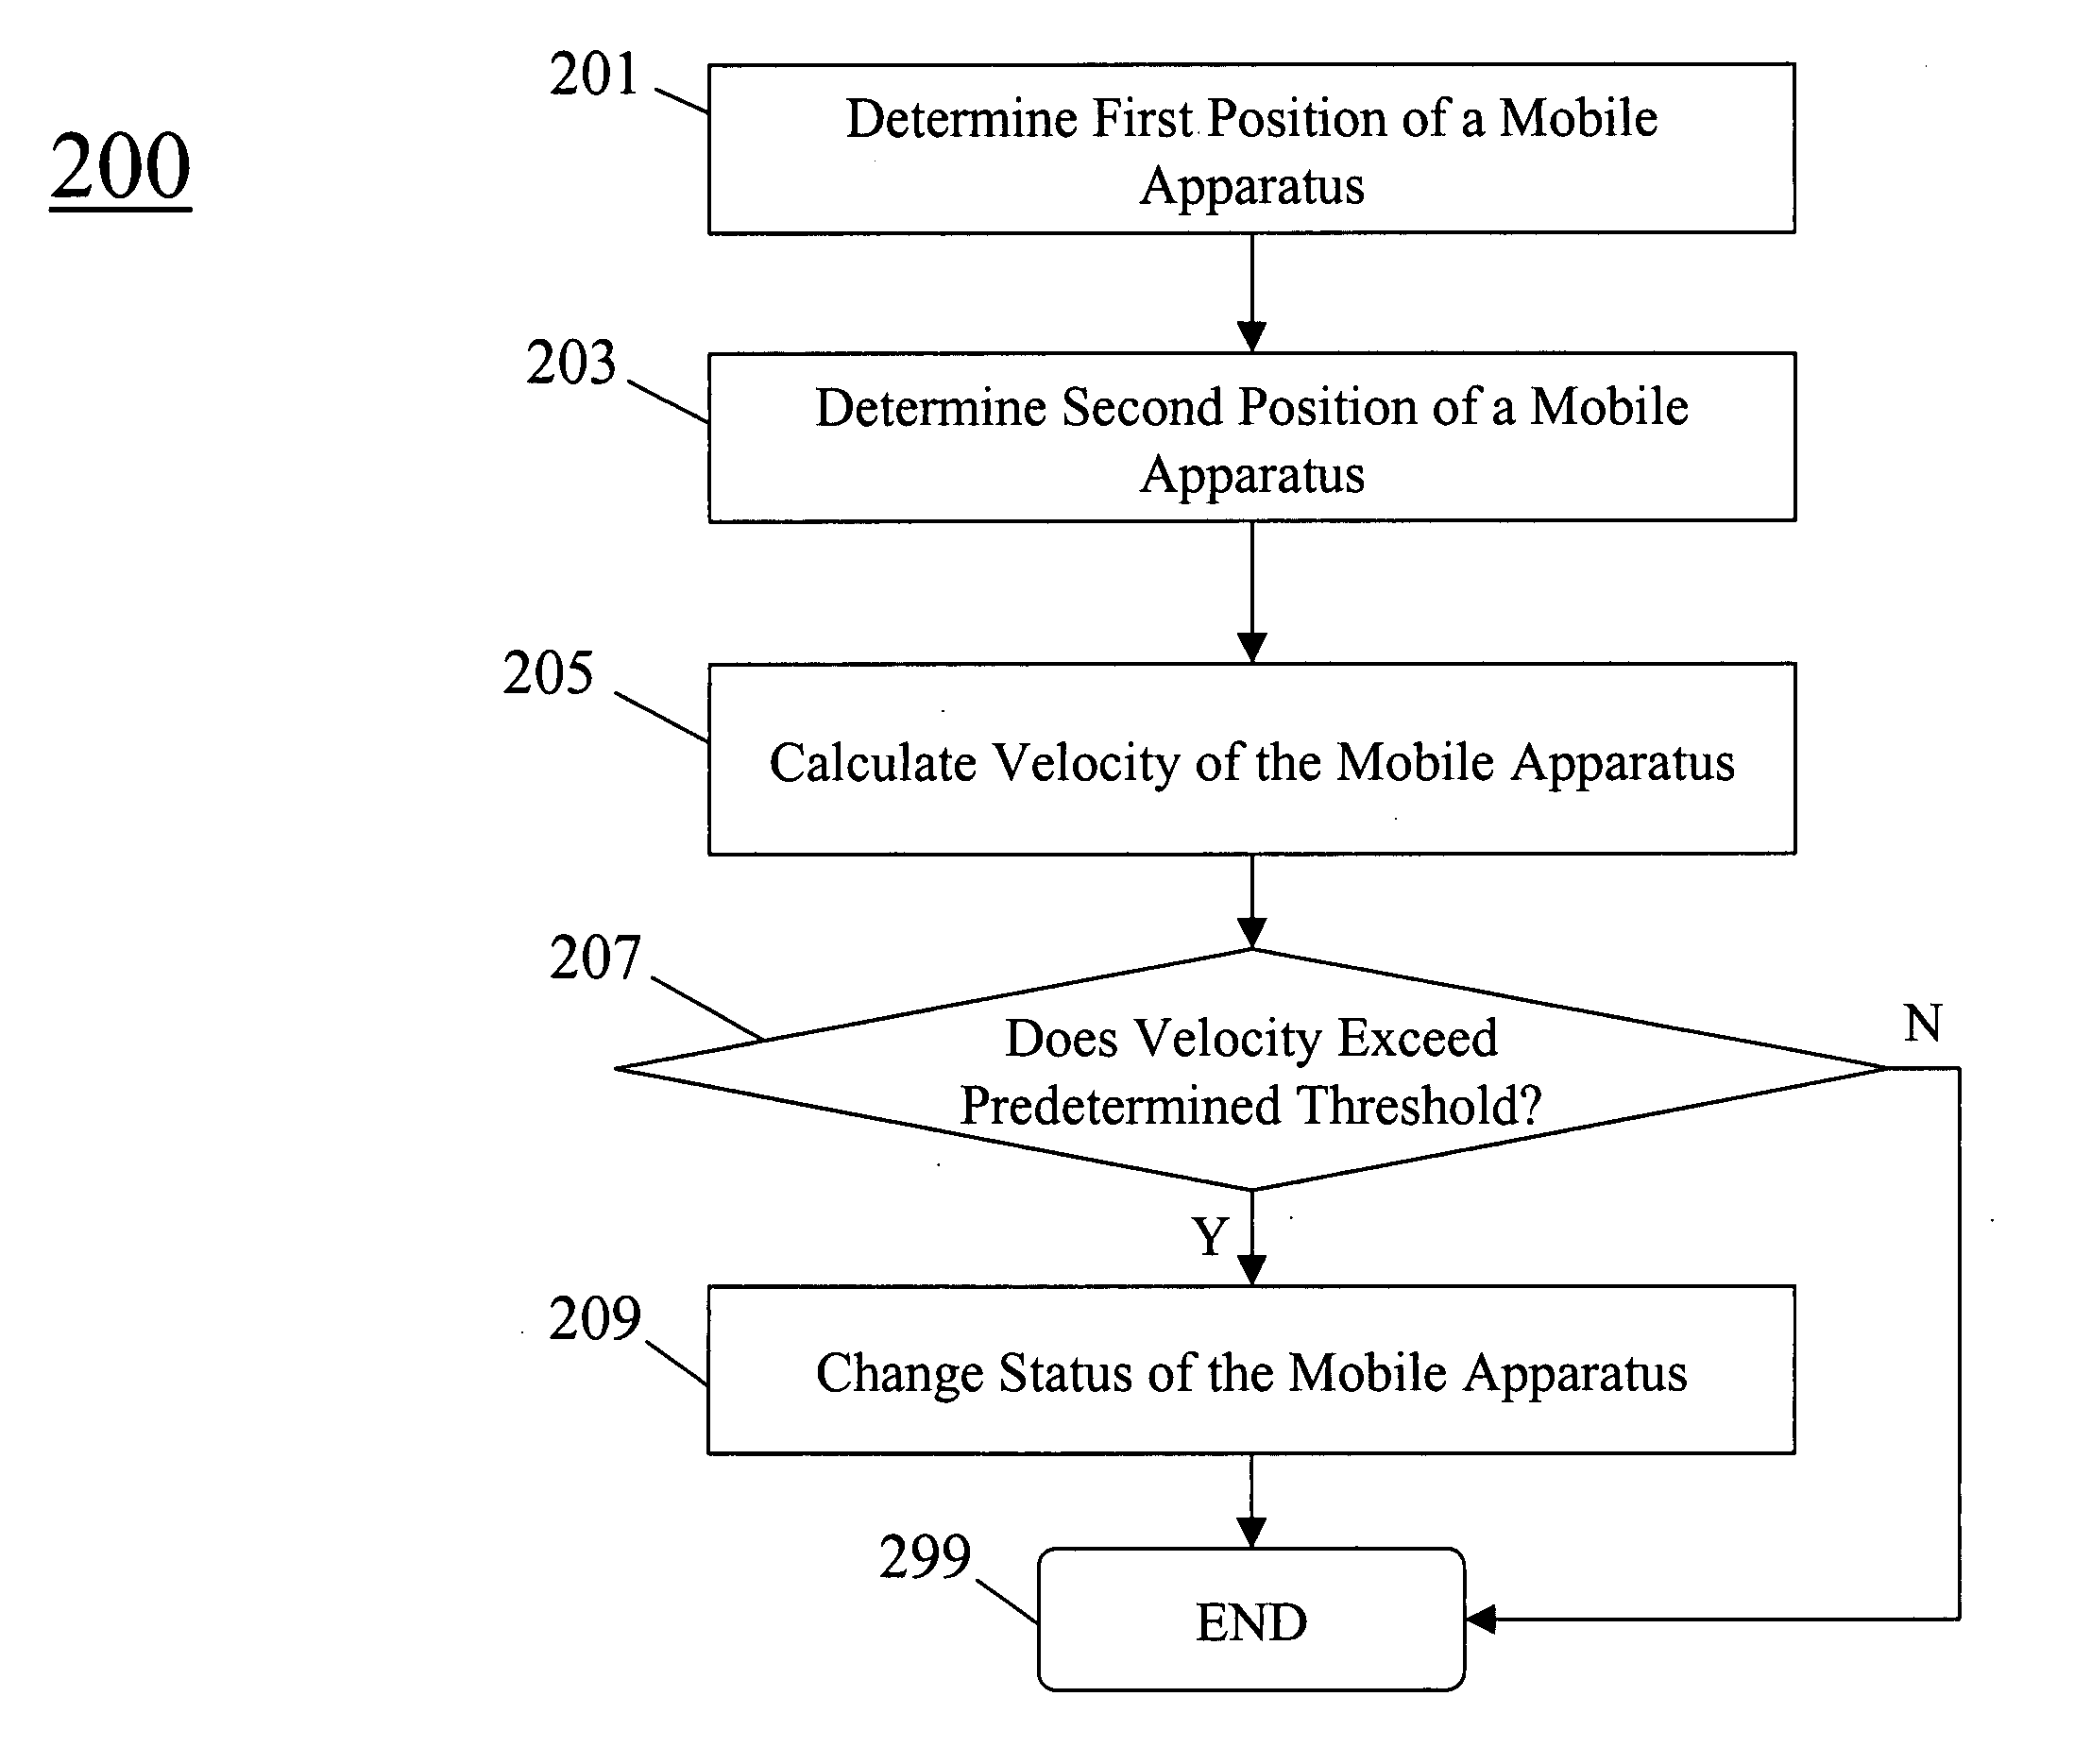 Method for changing the status of a mobile apparatus